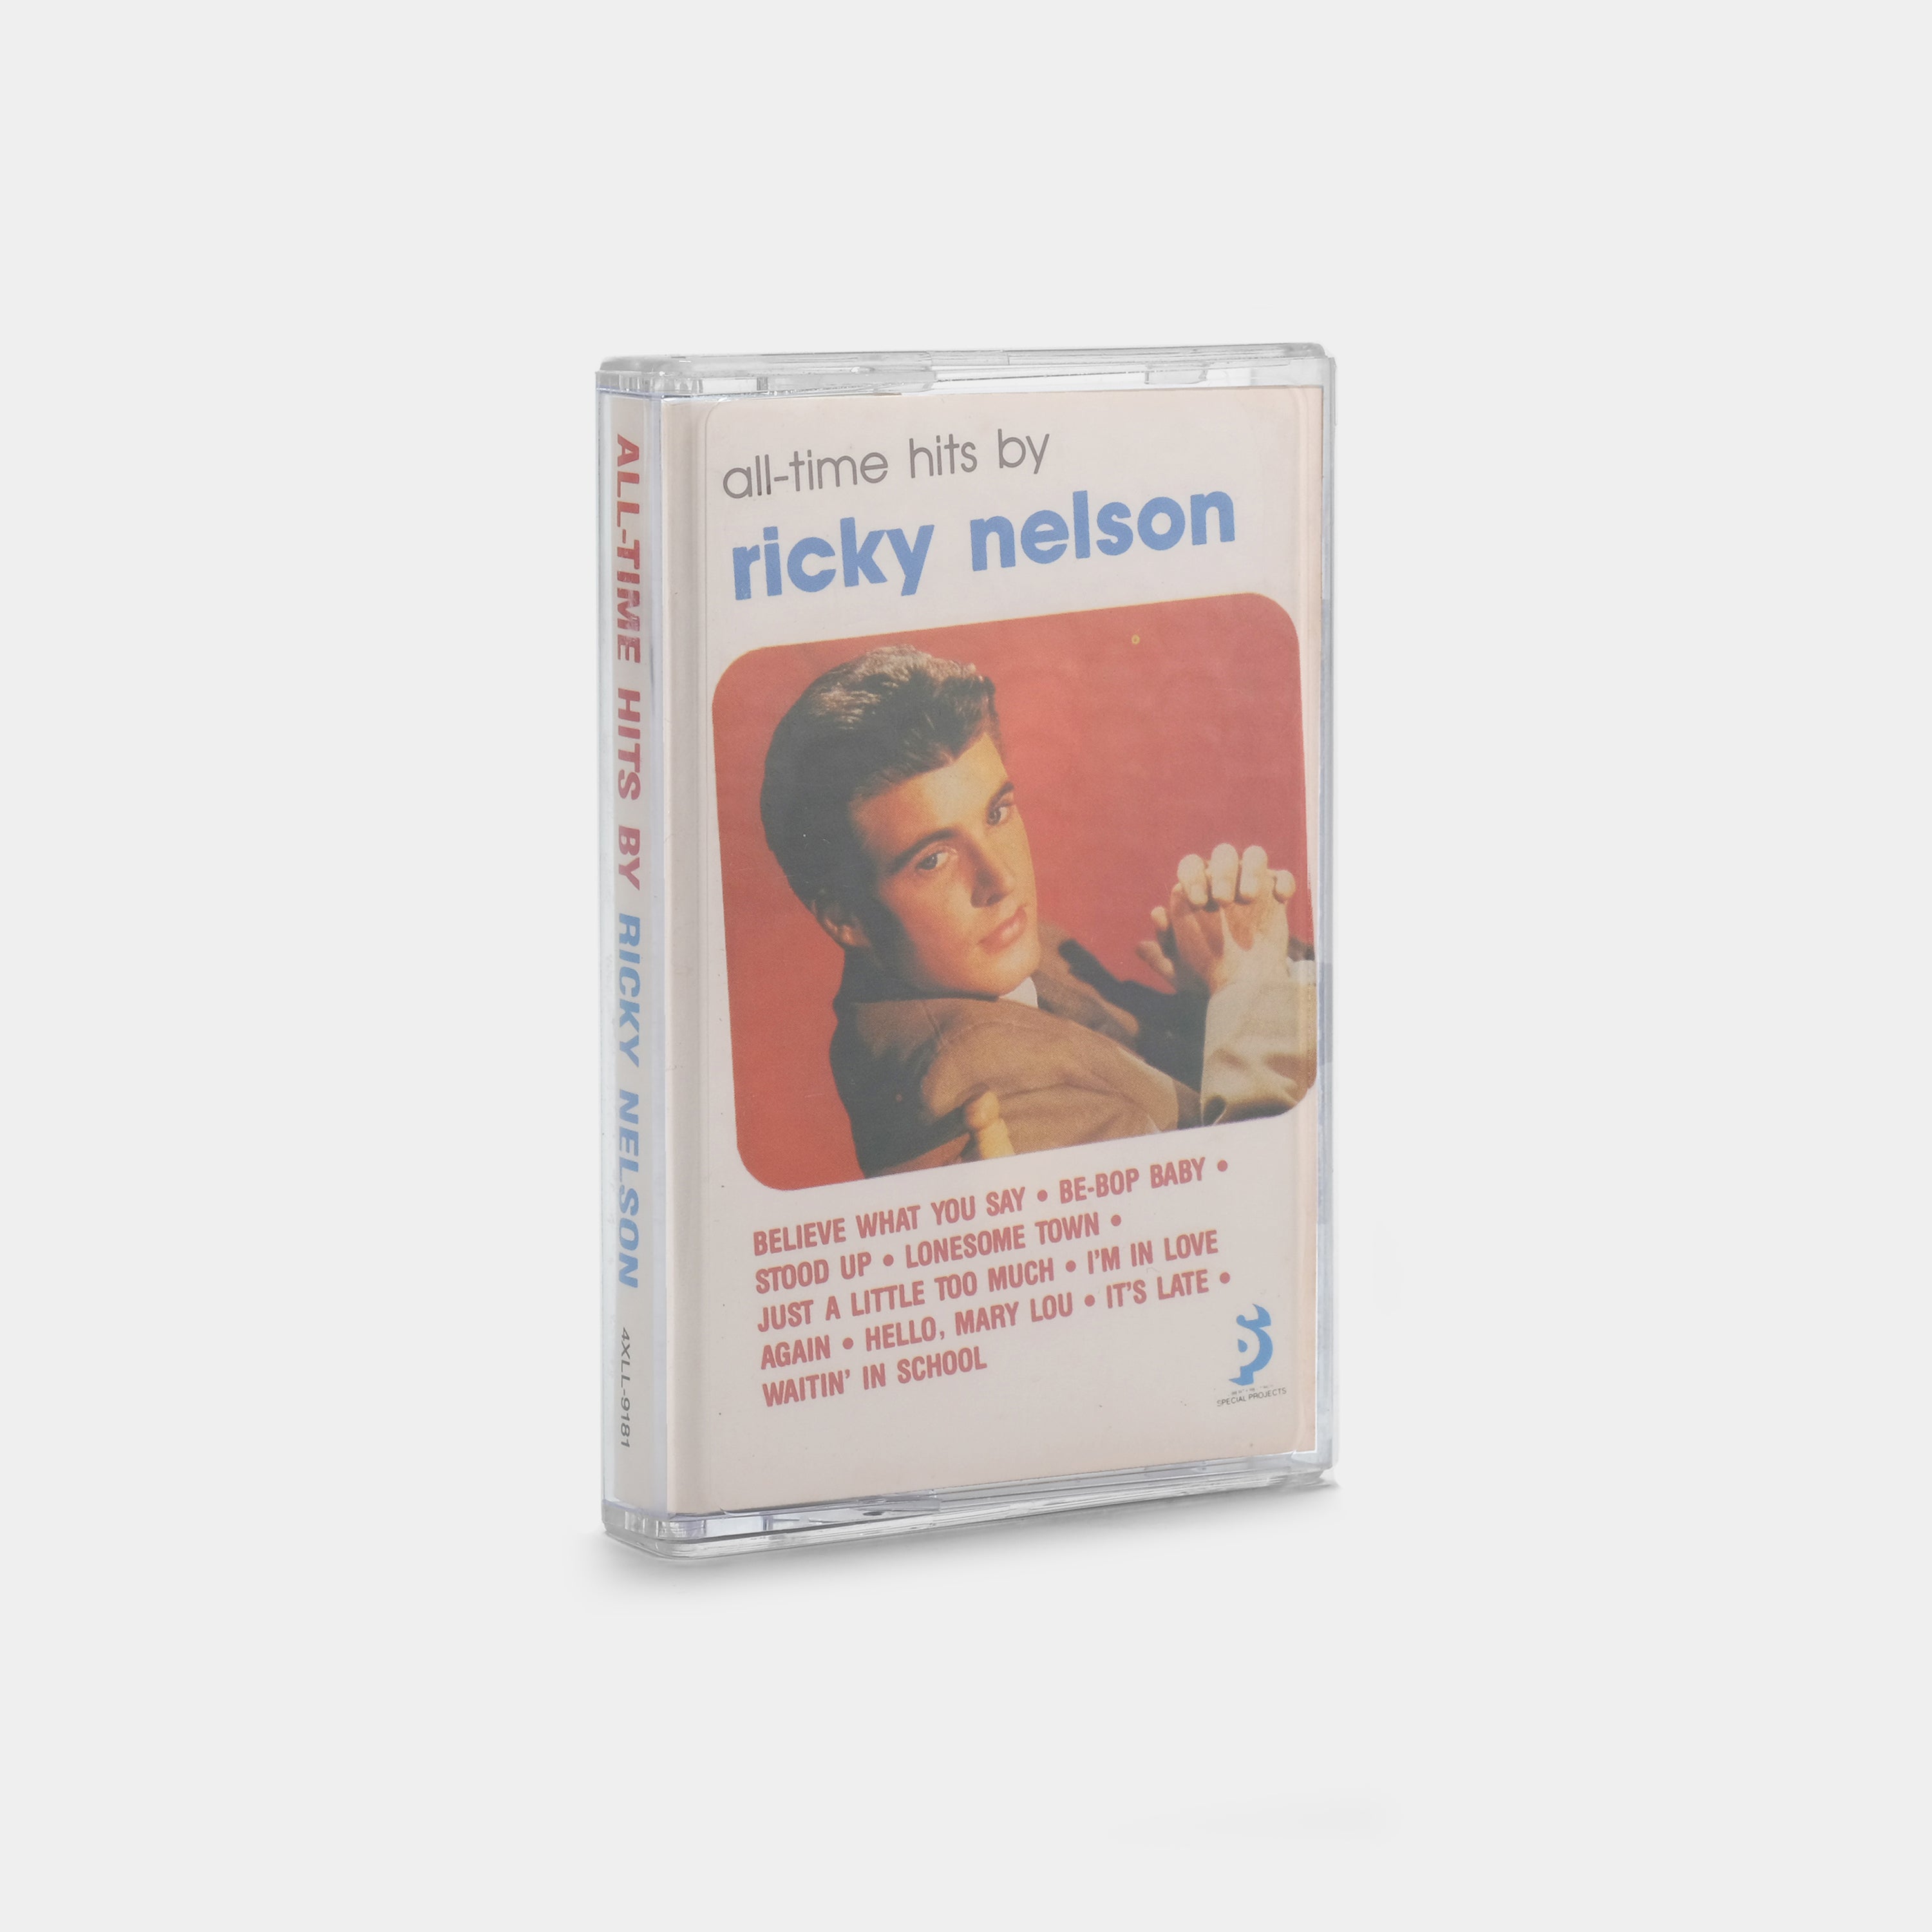 Ricky Nelson - All-Time Hits By Ricky Nelson Cassette Tape